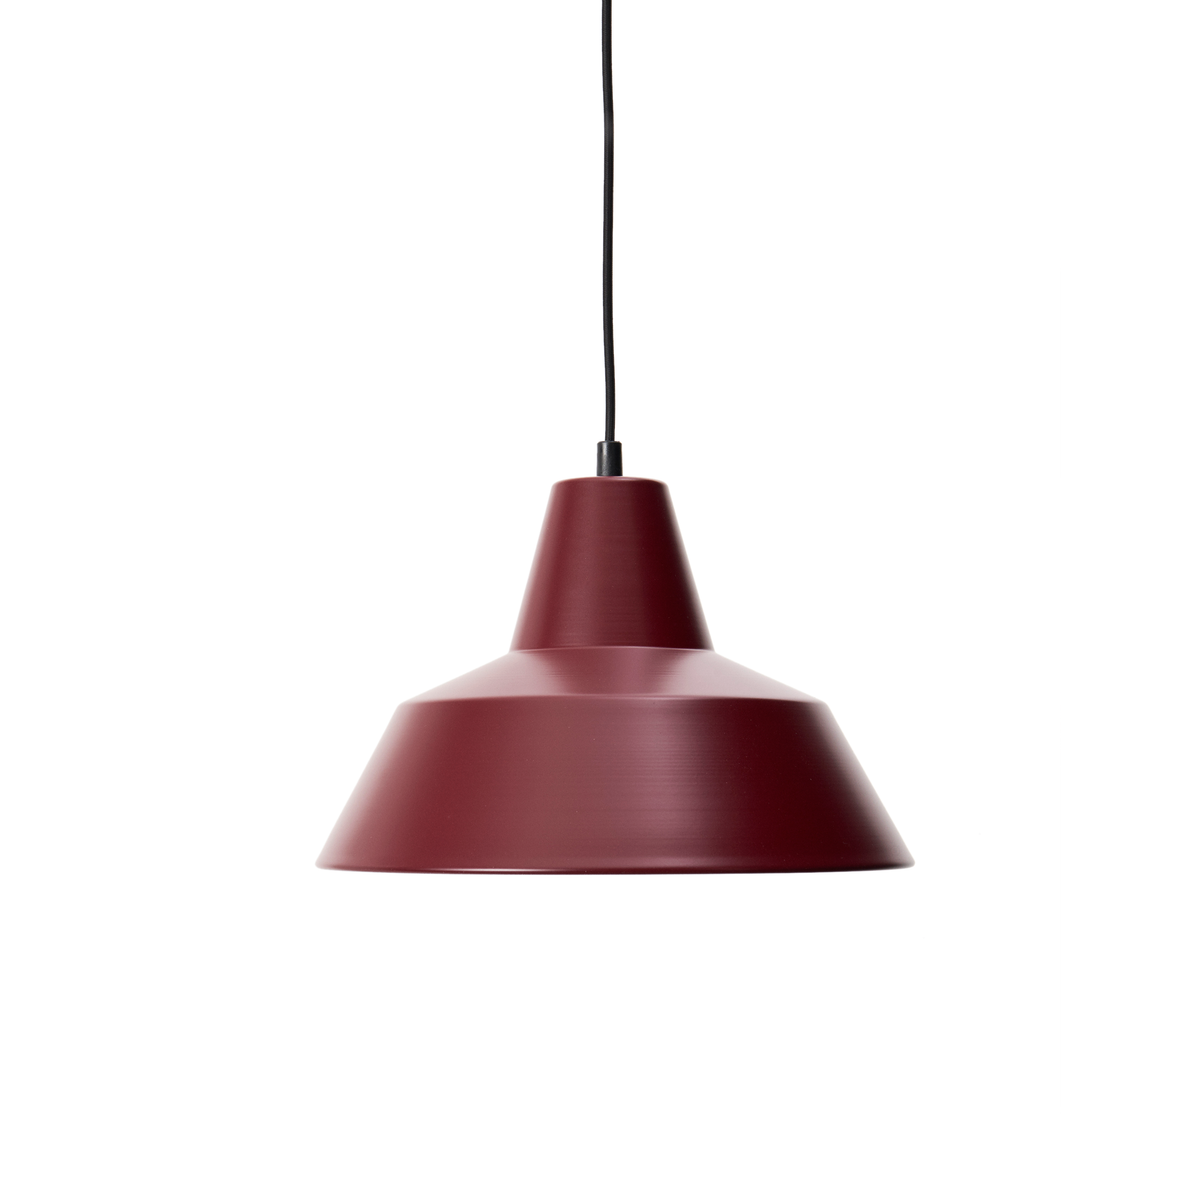 Made by Hand, Workshop Pendant Lamp W3, Pendant,